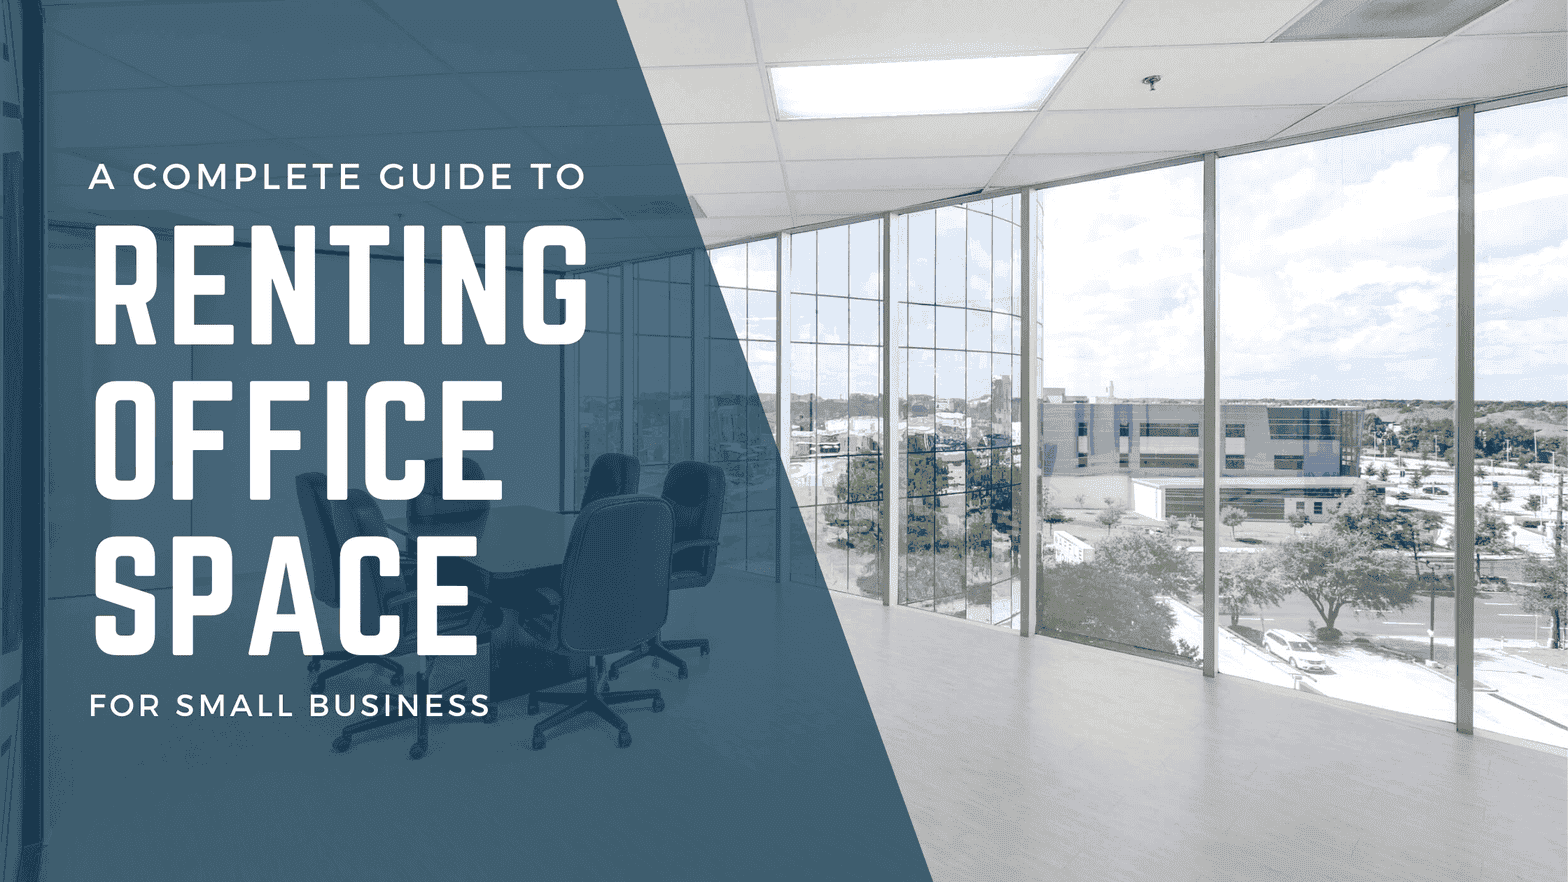 Renting Office Space for Small Business: a Complete Step-by-Step Guide